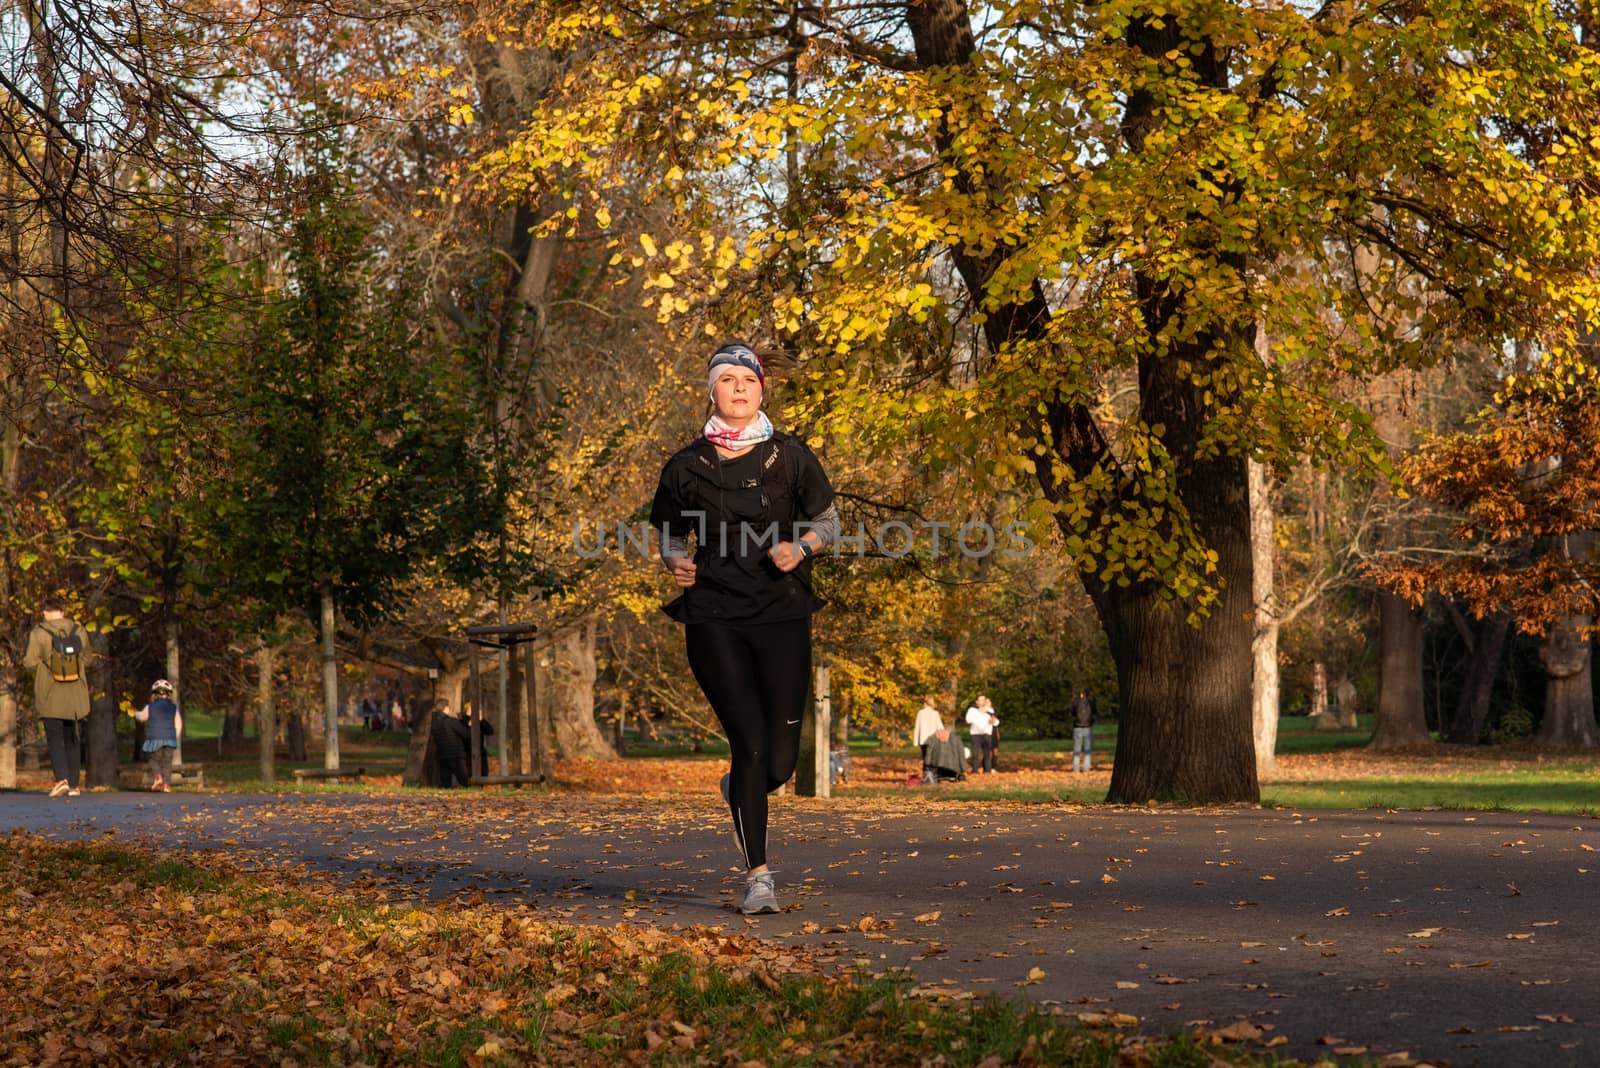 11/14/2020. Park Stromovka. Prague czech Republic. A woman is running in the park on a Sunday winter day. by gonzalobell